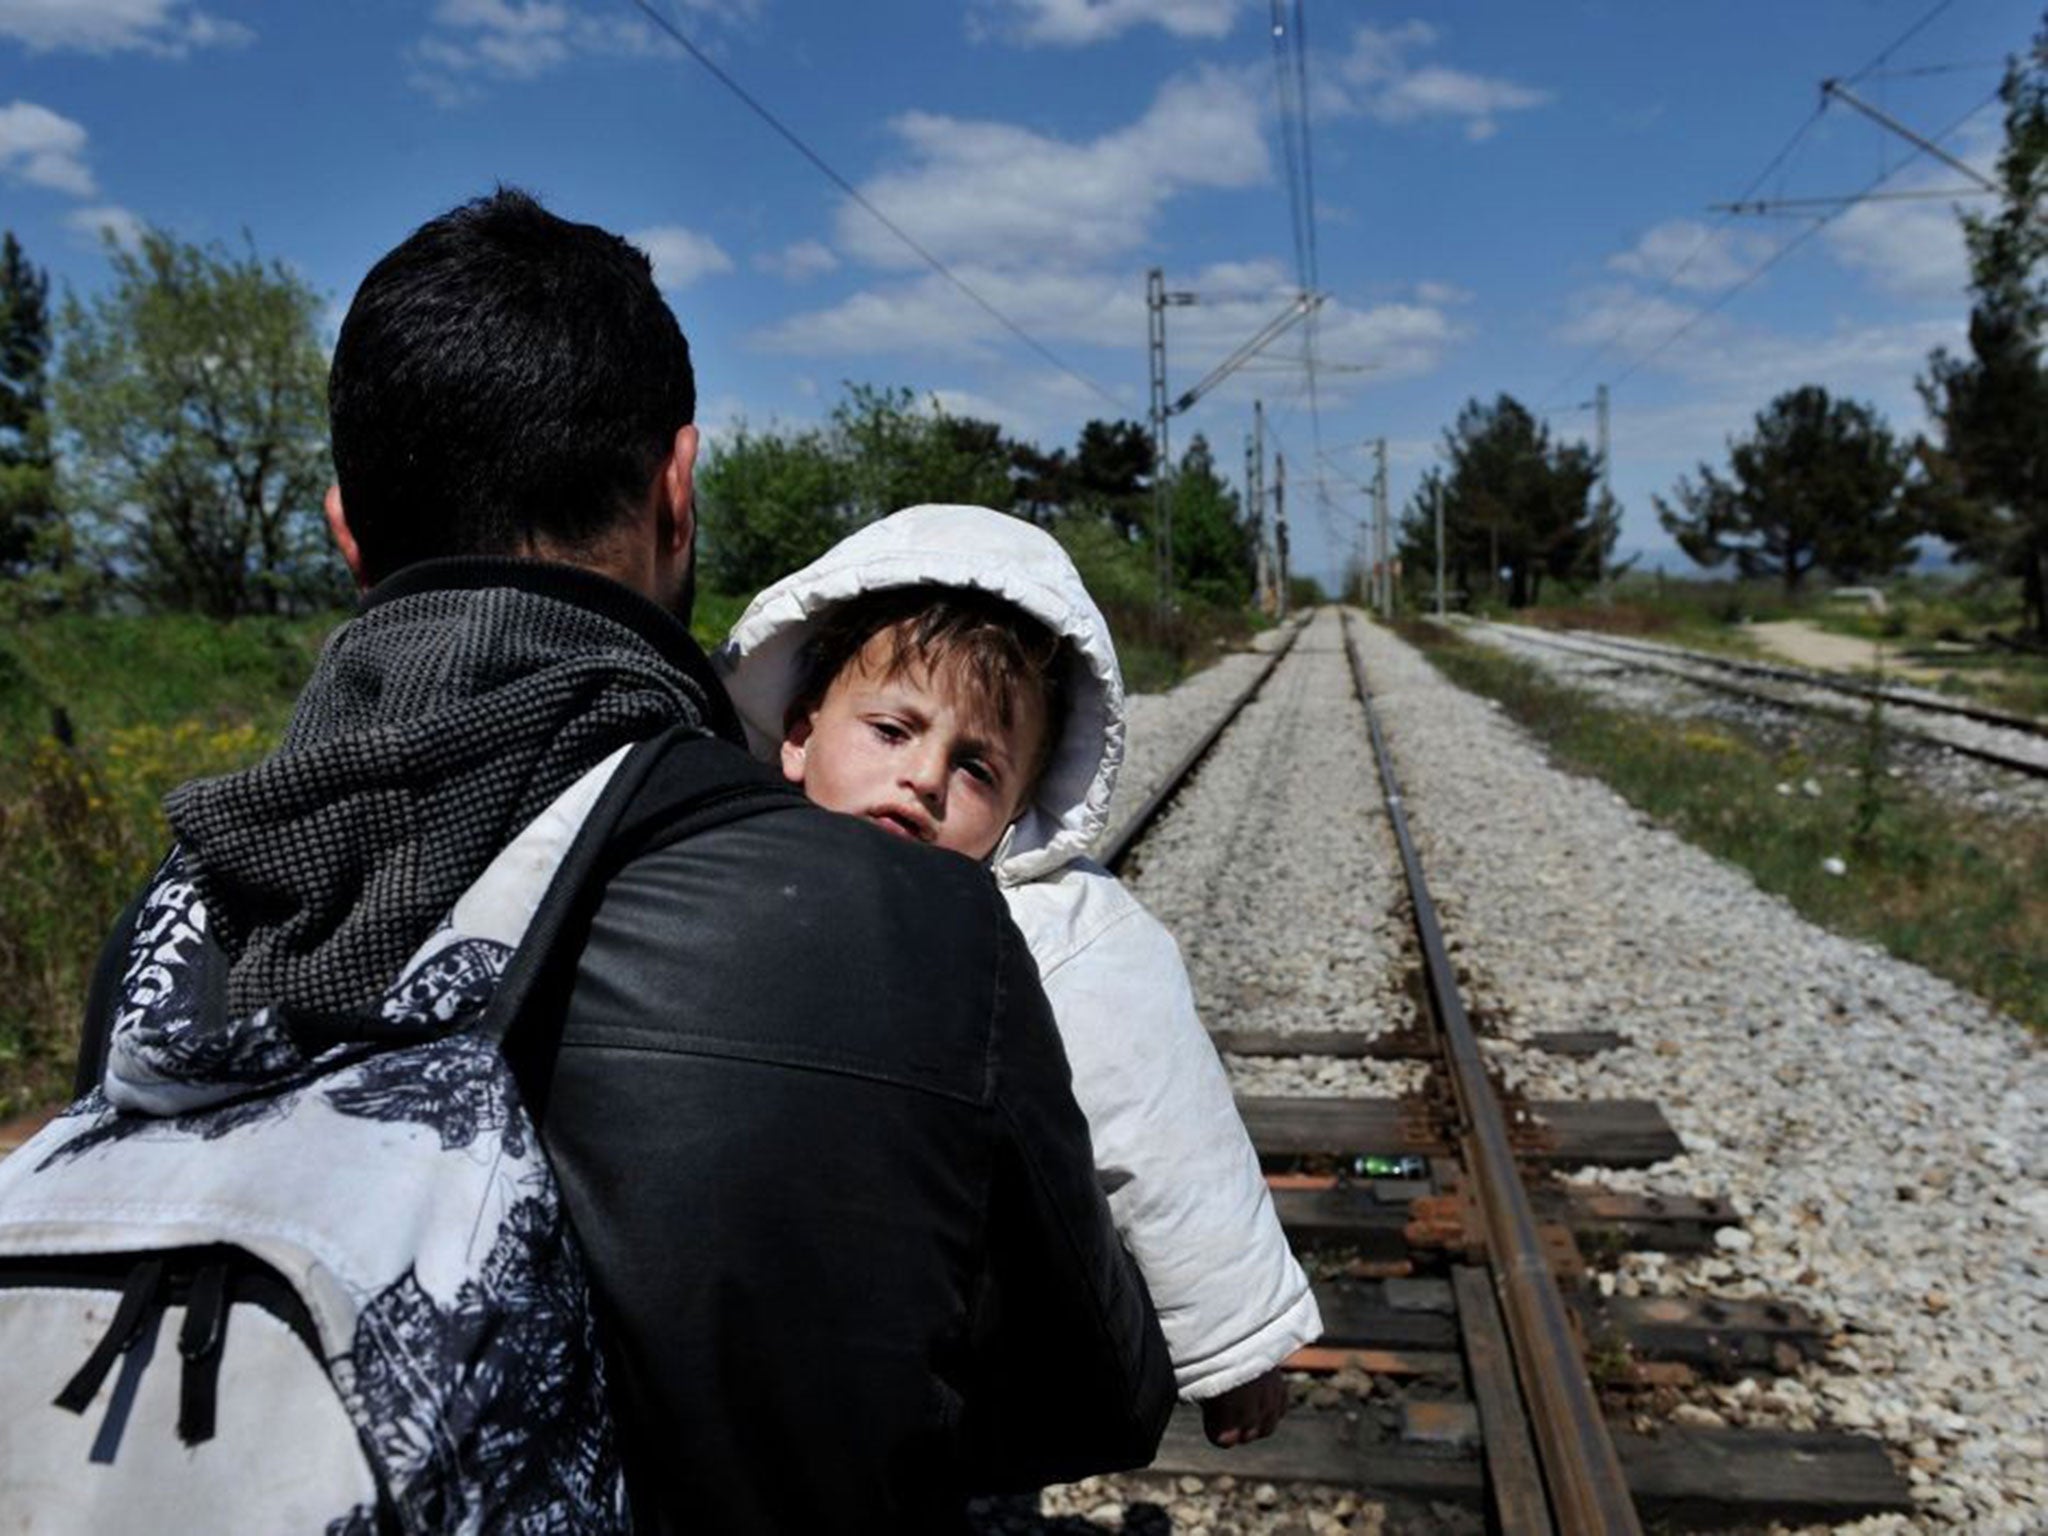 Migrants travelling through Macedonia, seen here near the border with Greece, often use railway lines